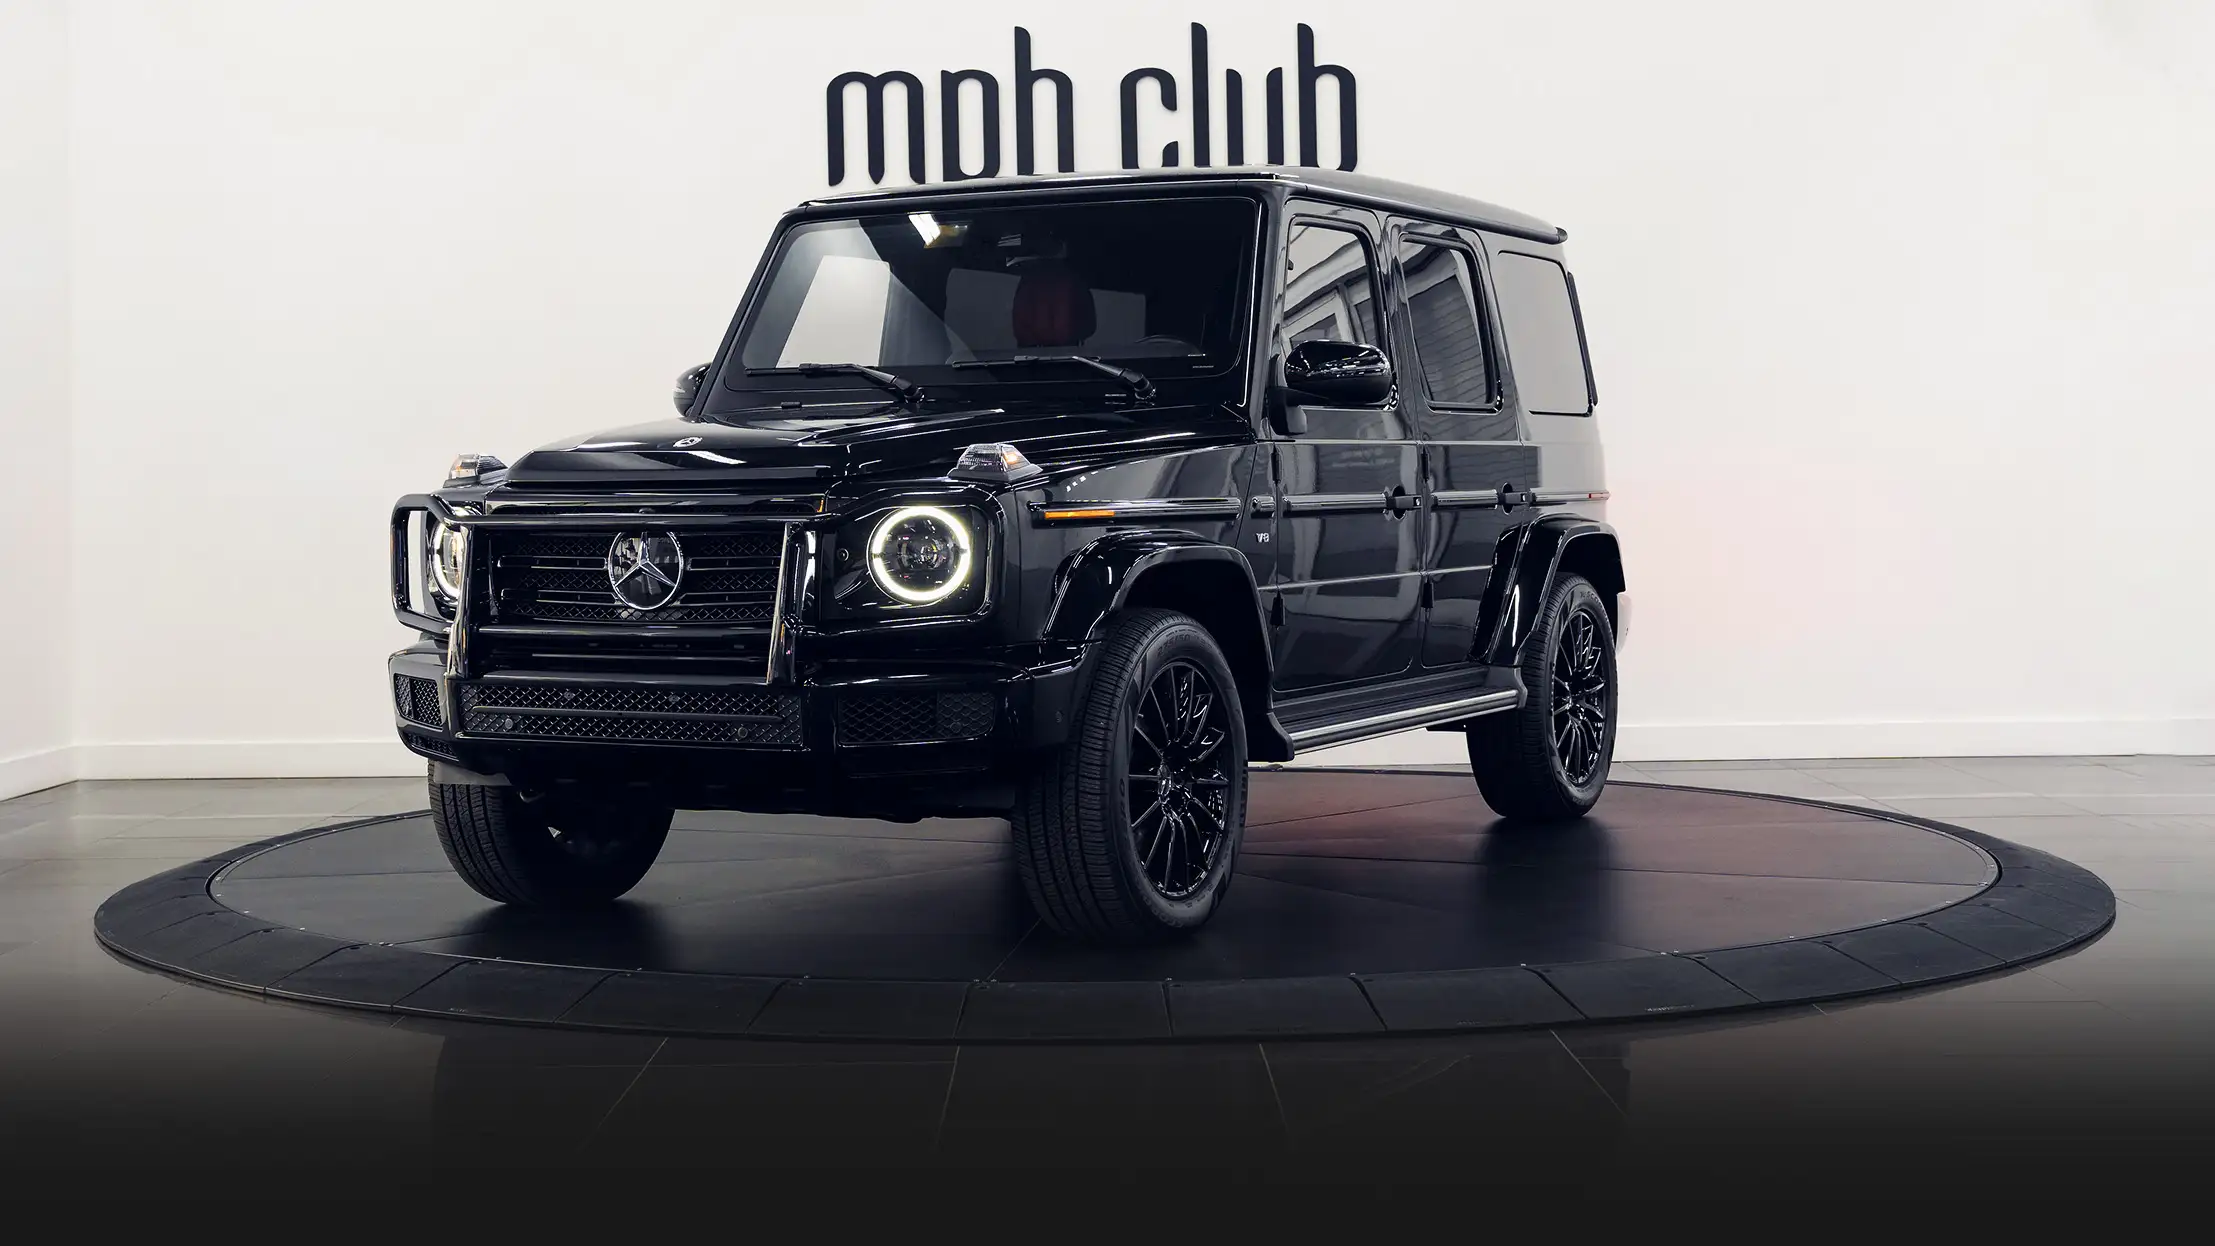 Black on red Mercedes Benz G550 rental profile view turntable mph club